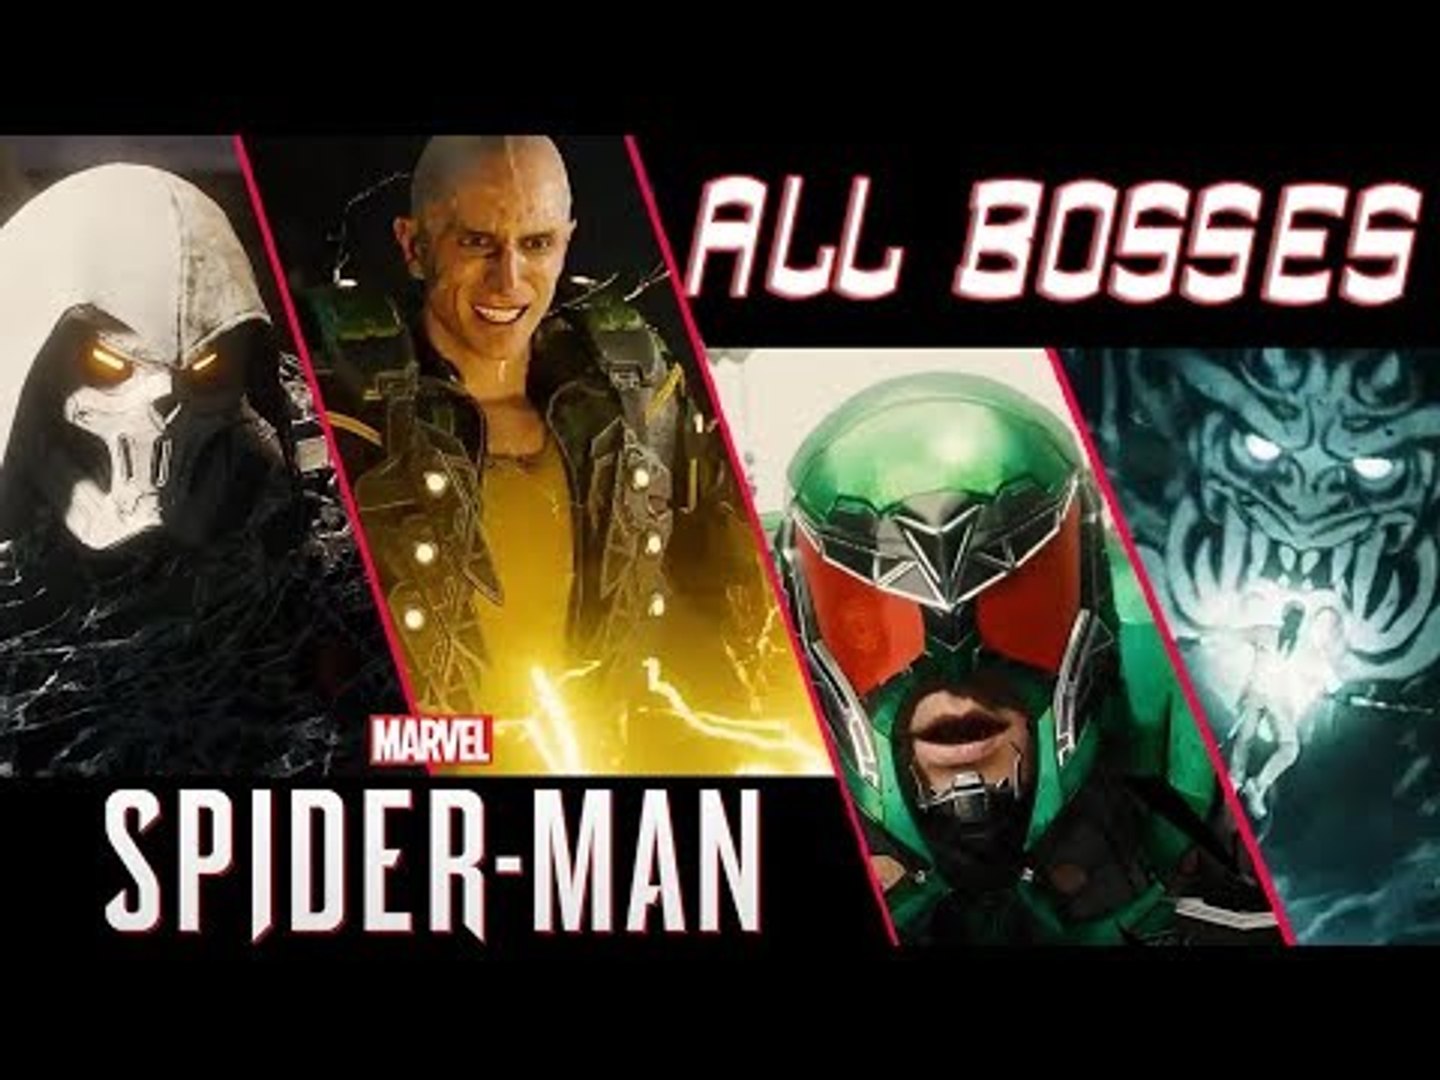 Marvel's Spider-Man All BOSSSES | Final Boss (PS4) - video Dailymotion